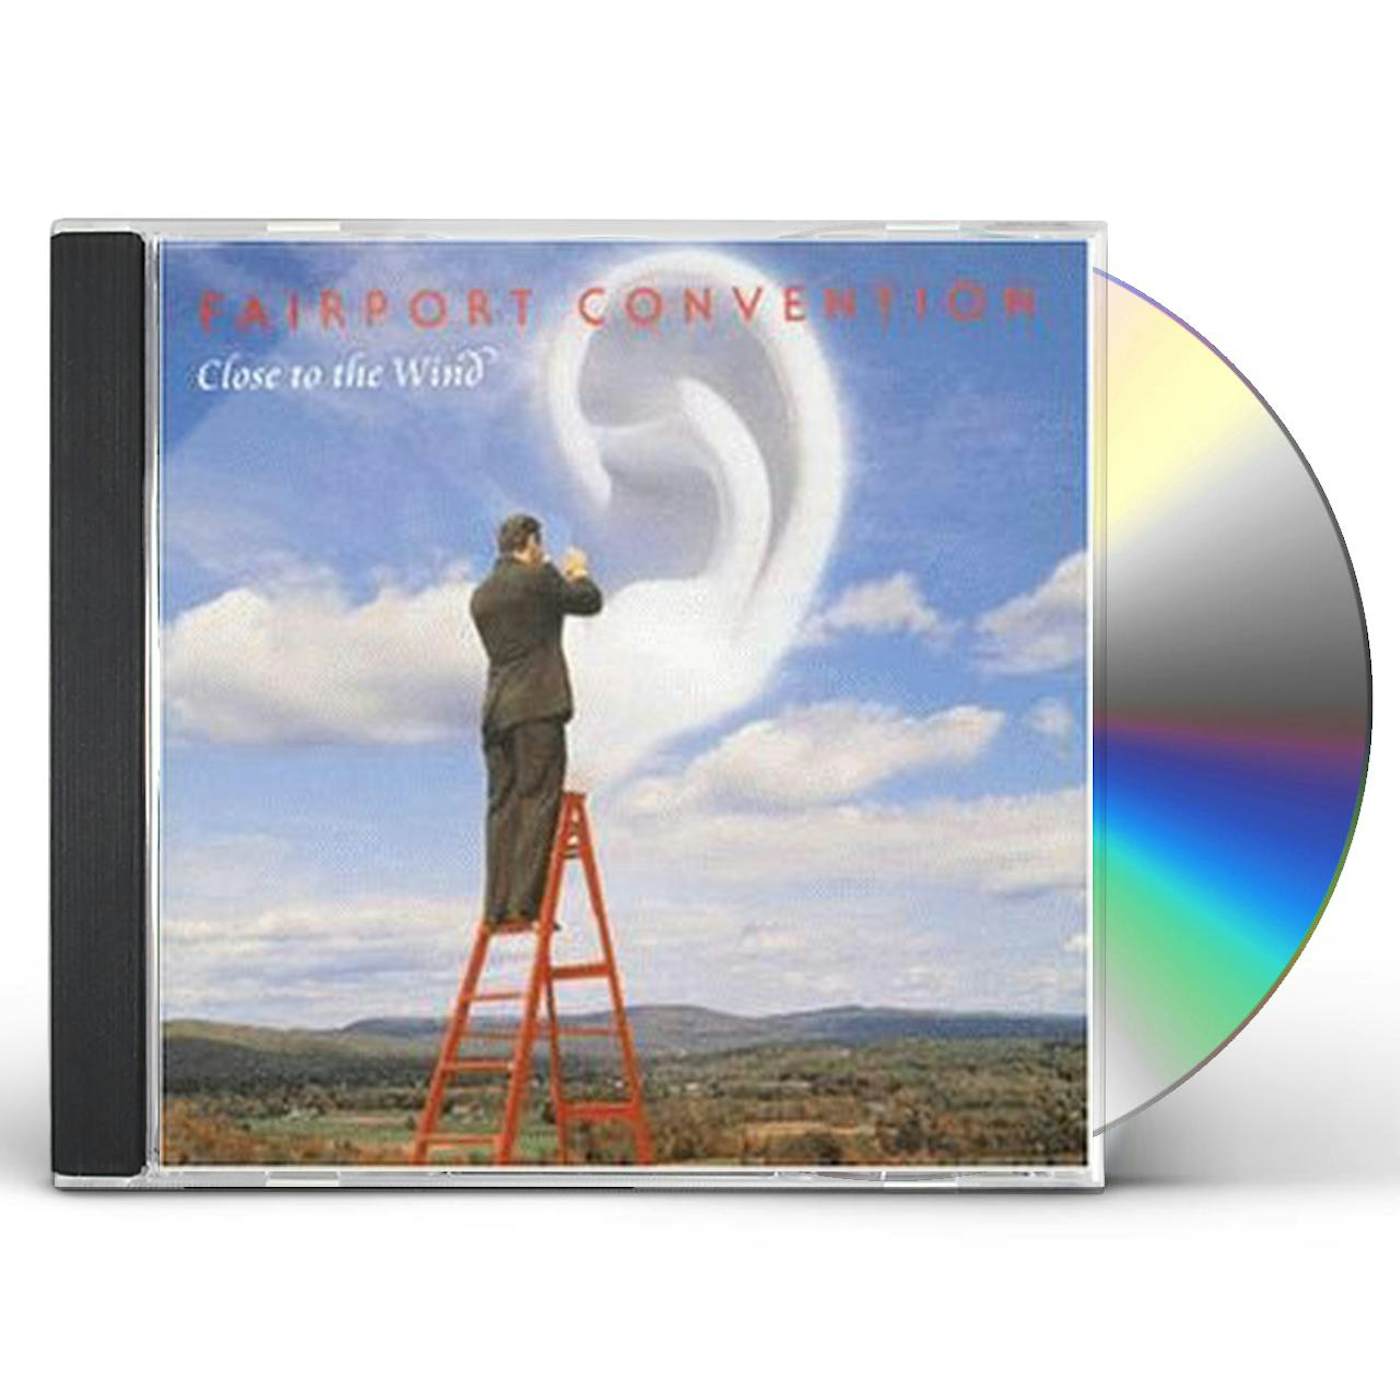 Fairport Convention CLOSE TO THE WIND CD